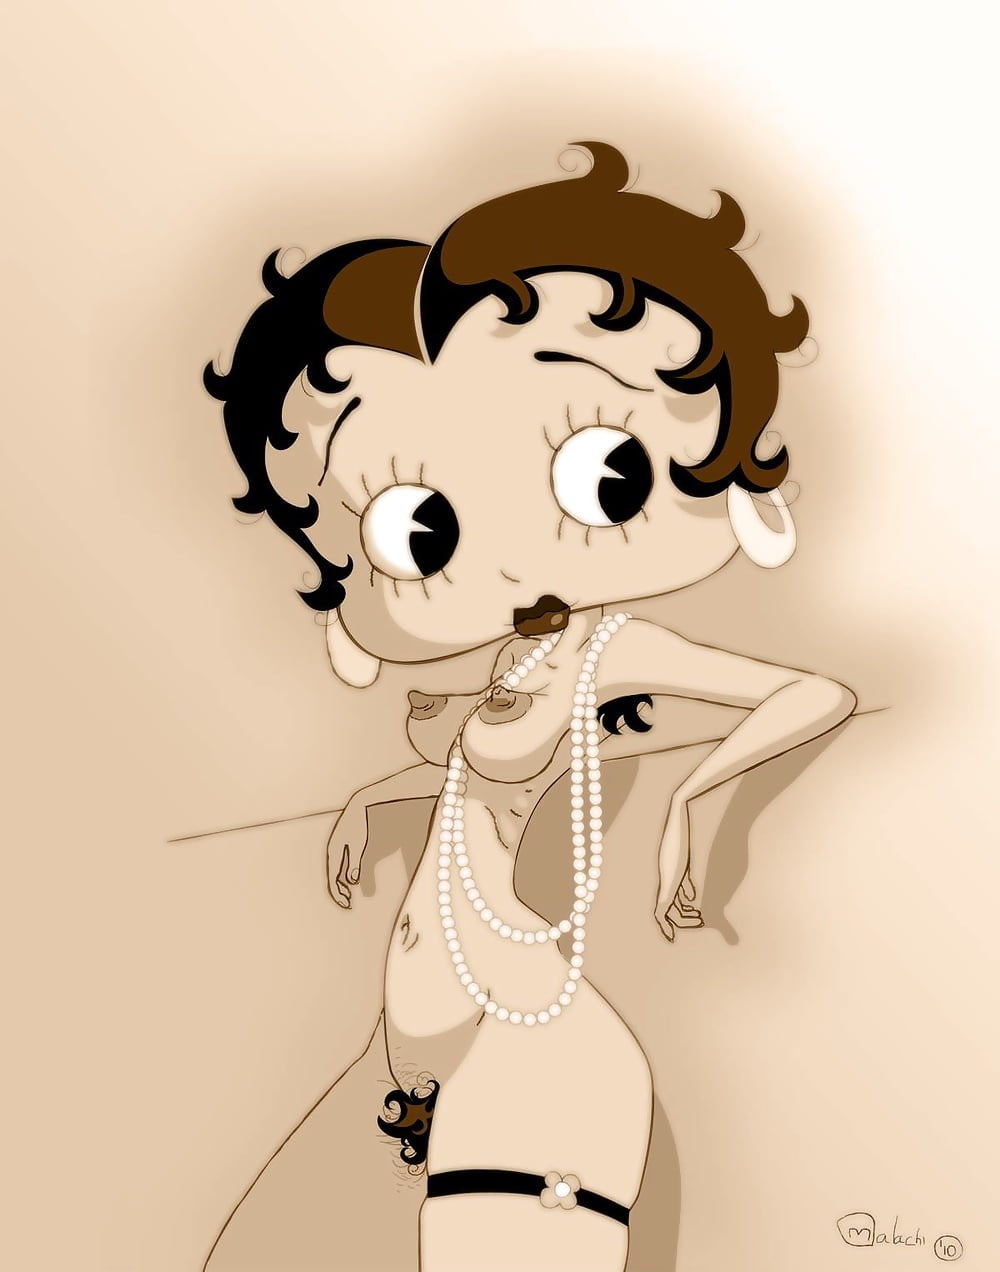 See and Save As betty boop rules porn pict - 4crot.com